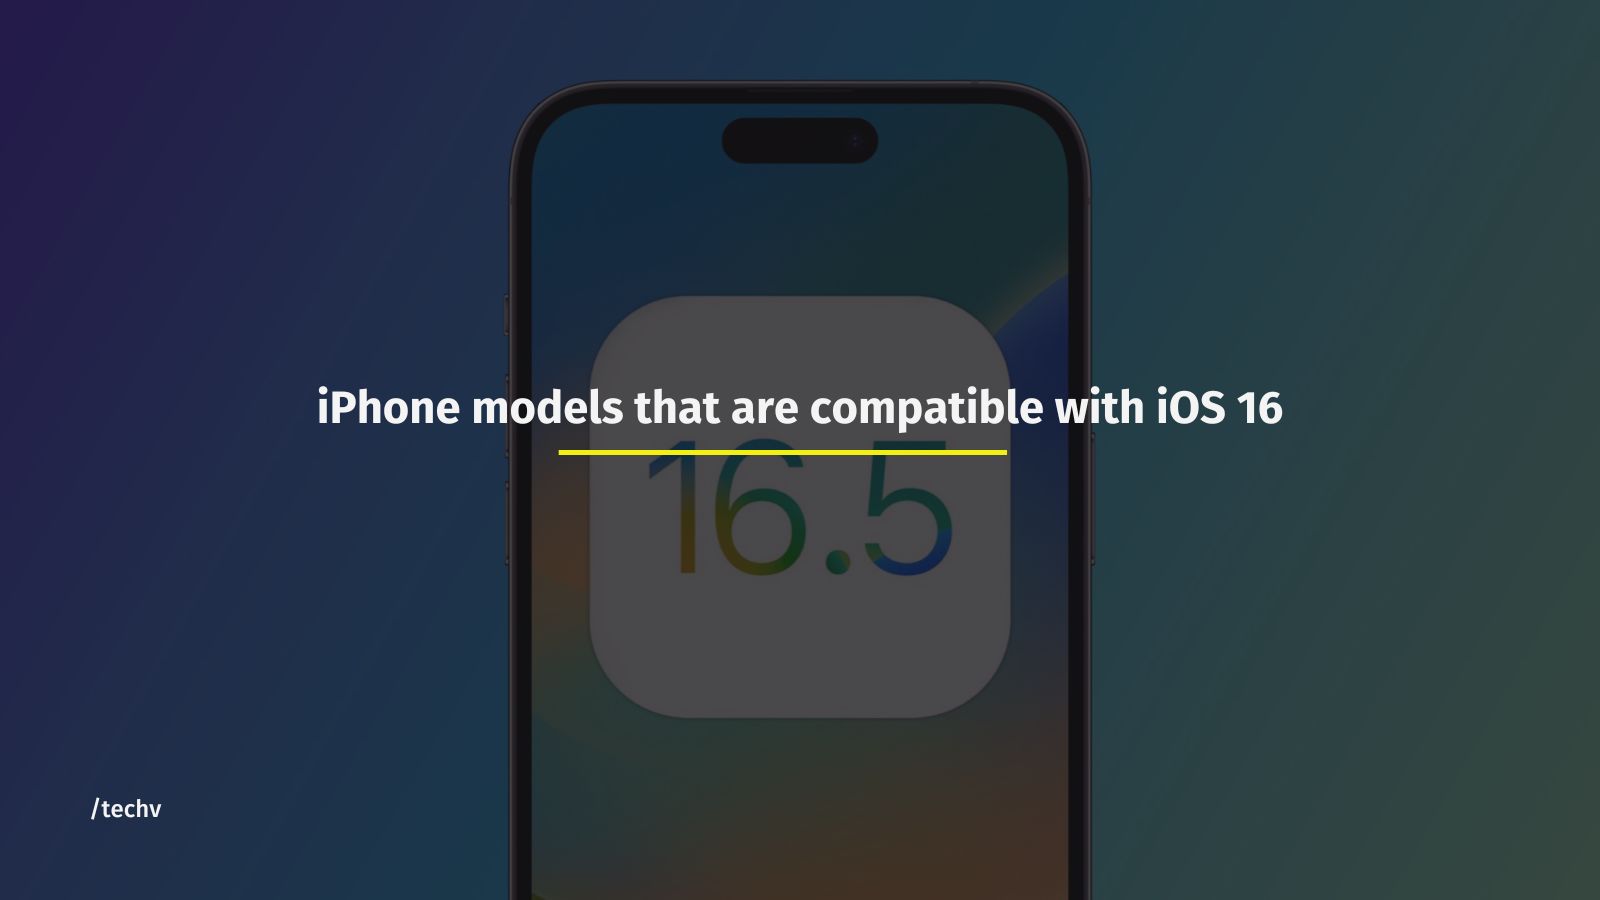 iPhone models that are compatible with iOS 16